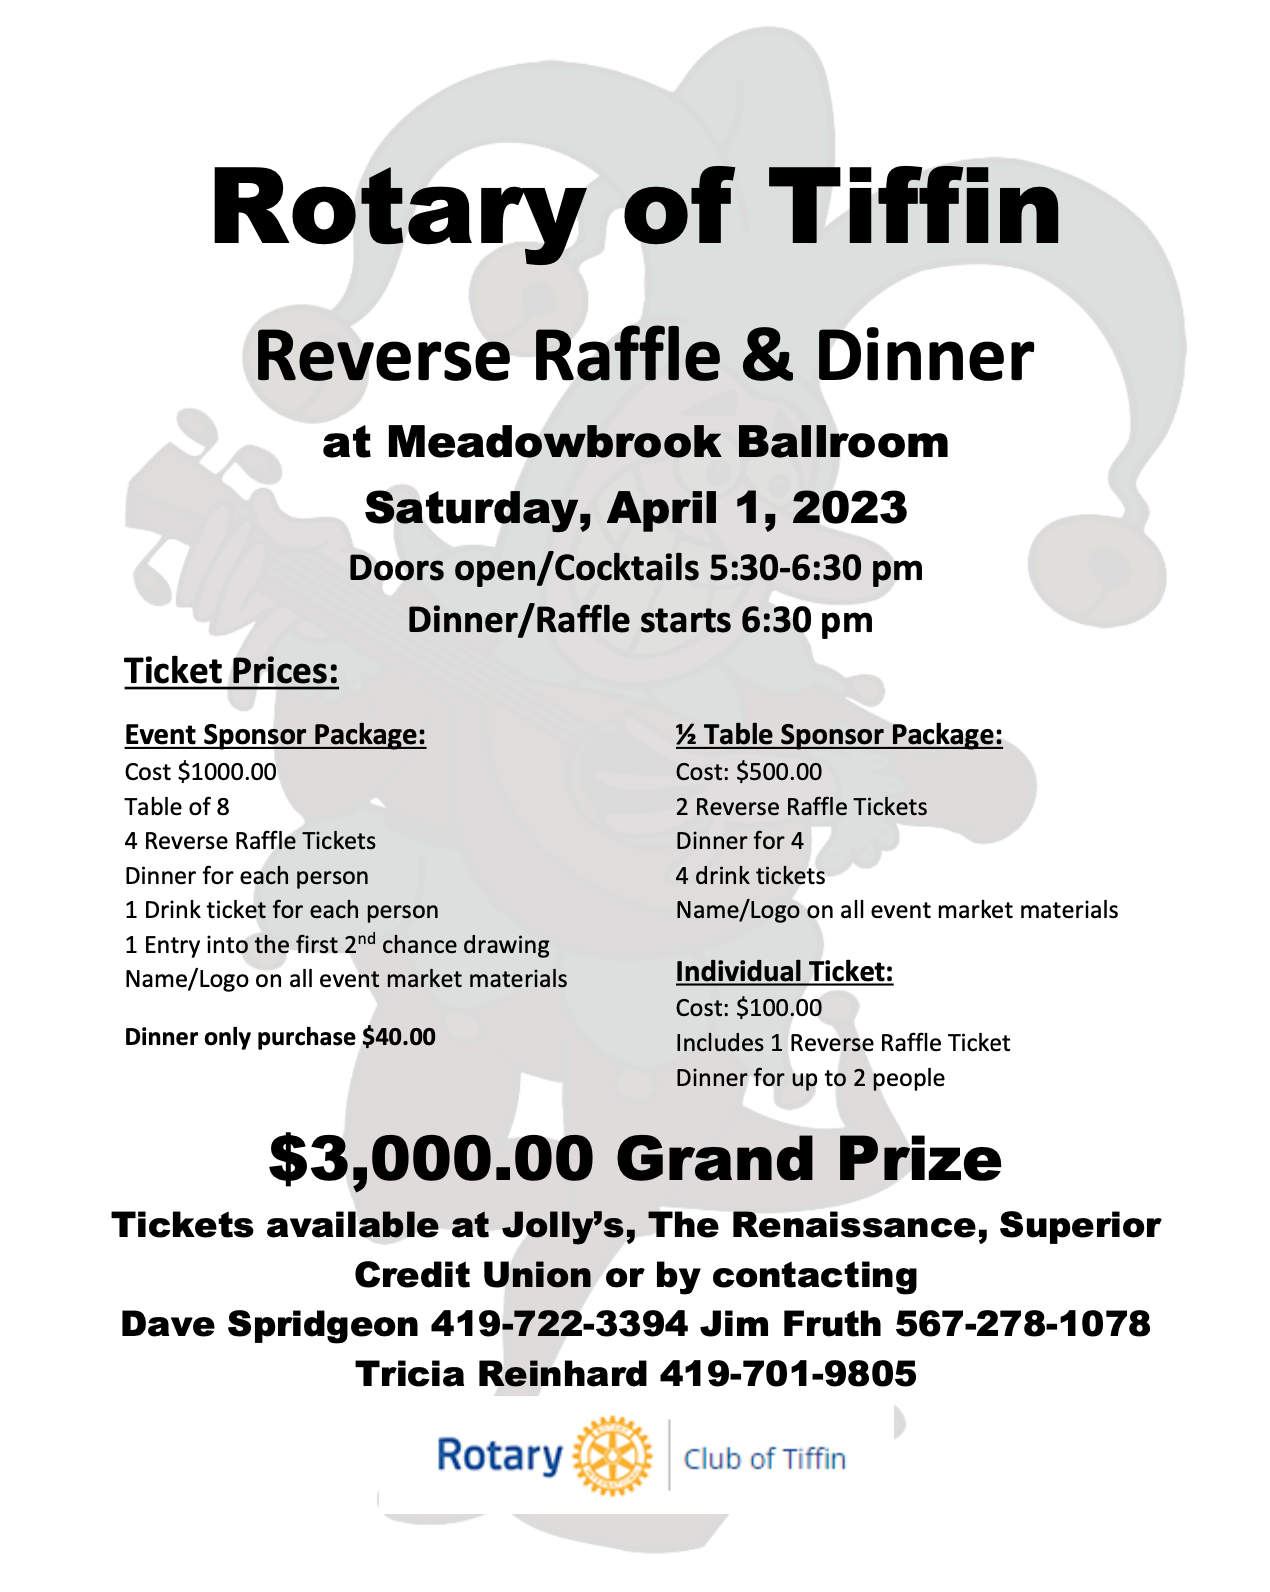 Rotary of Tiffin Reverse Raffle and Dinner